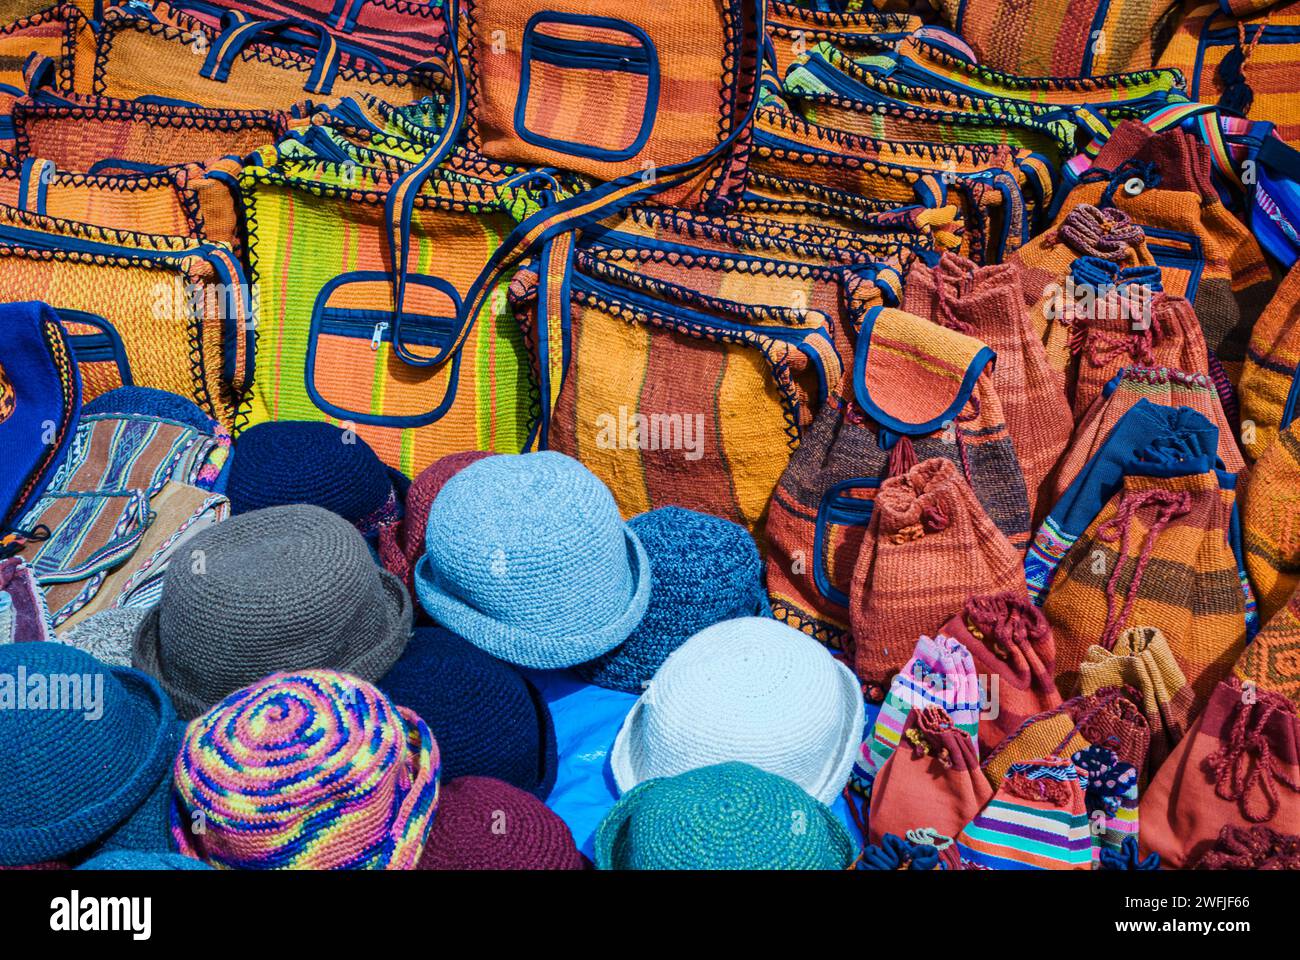 Crochet hats, bags and luggage in a peruvian street market Stock Photo